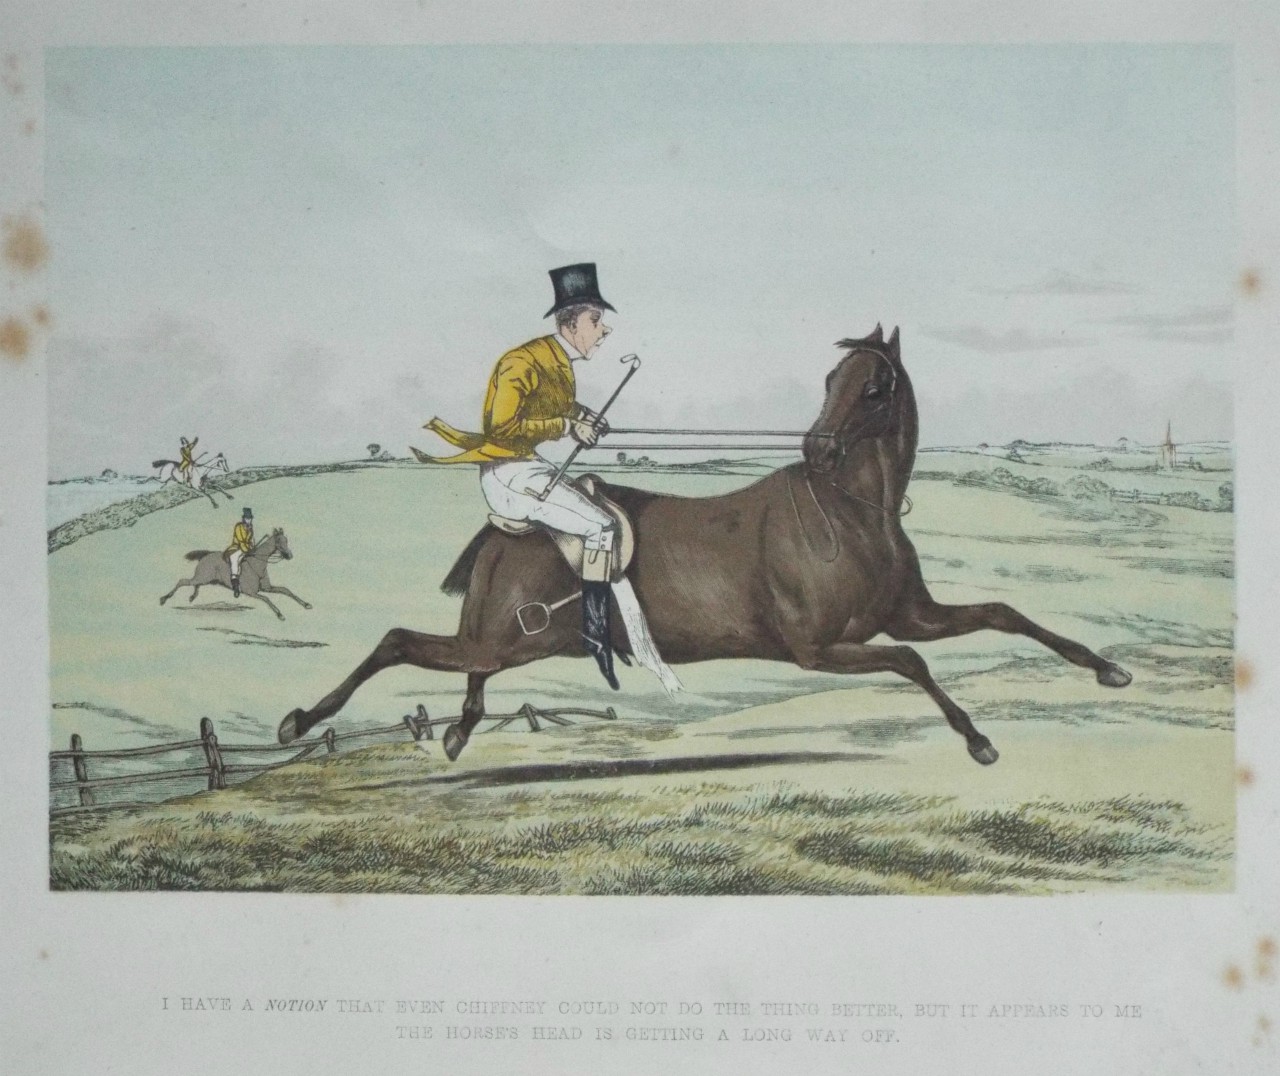 Chromo-lithograph - I have a Notion that even Chiffney could not do the thing better, but it appears to me the horse's head is getting a long way off.